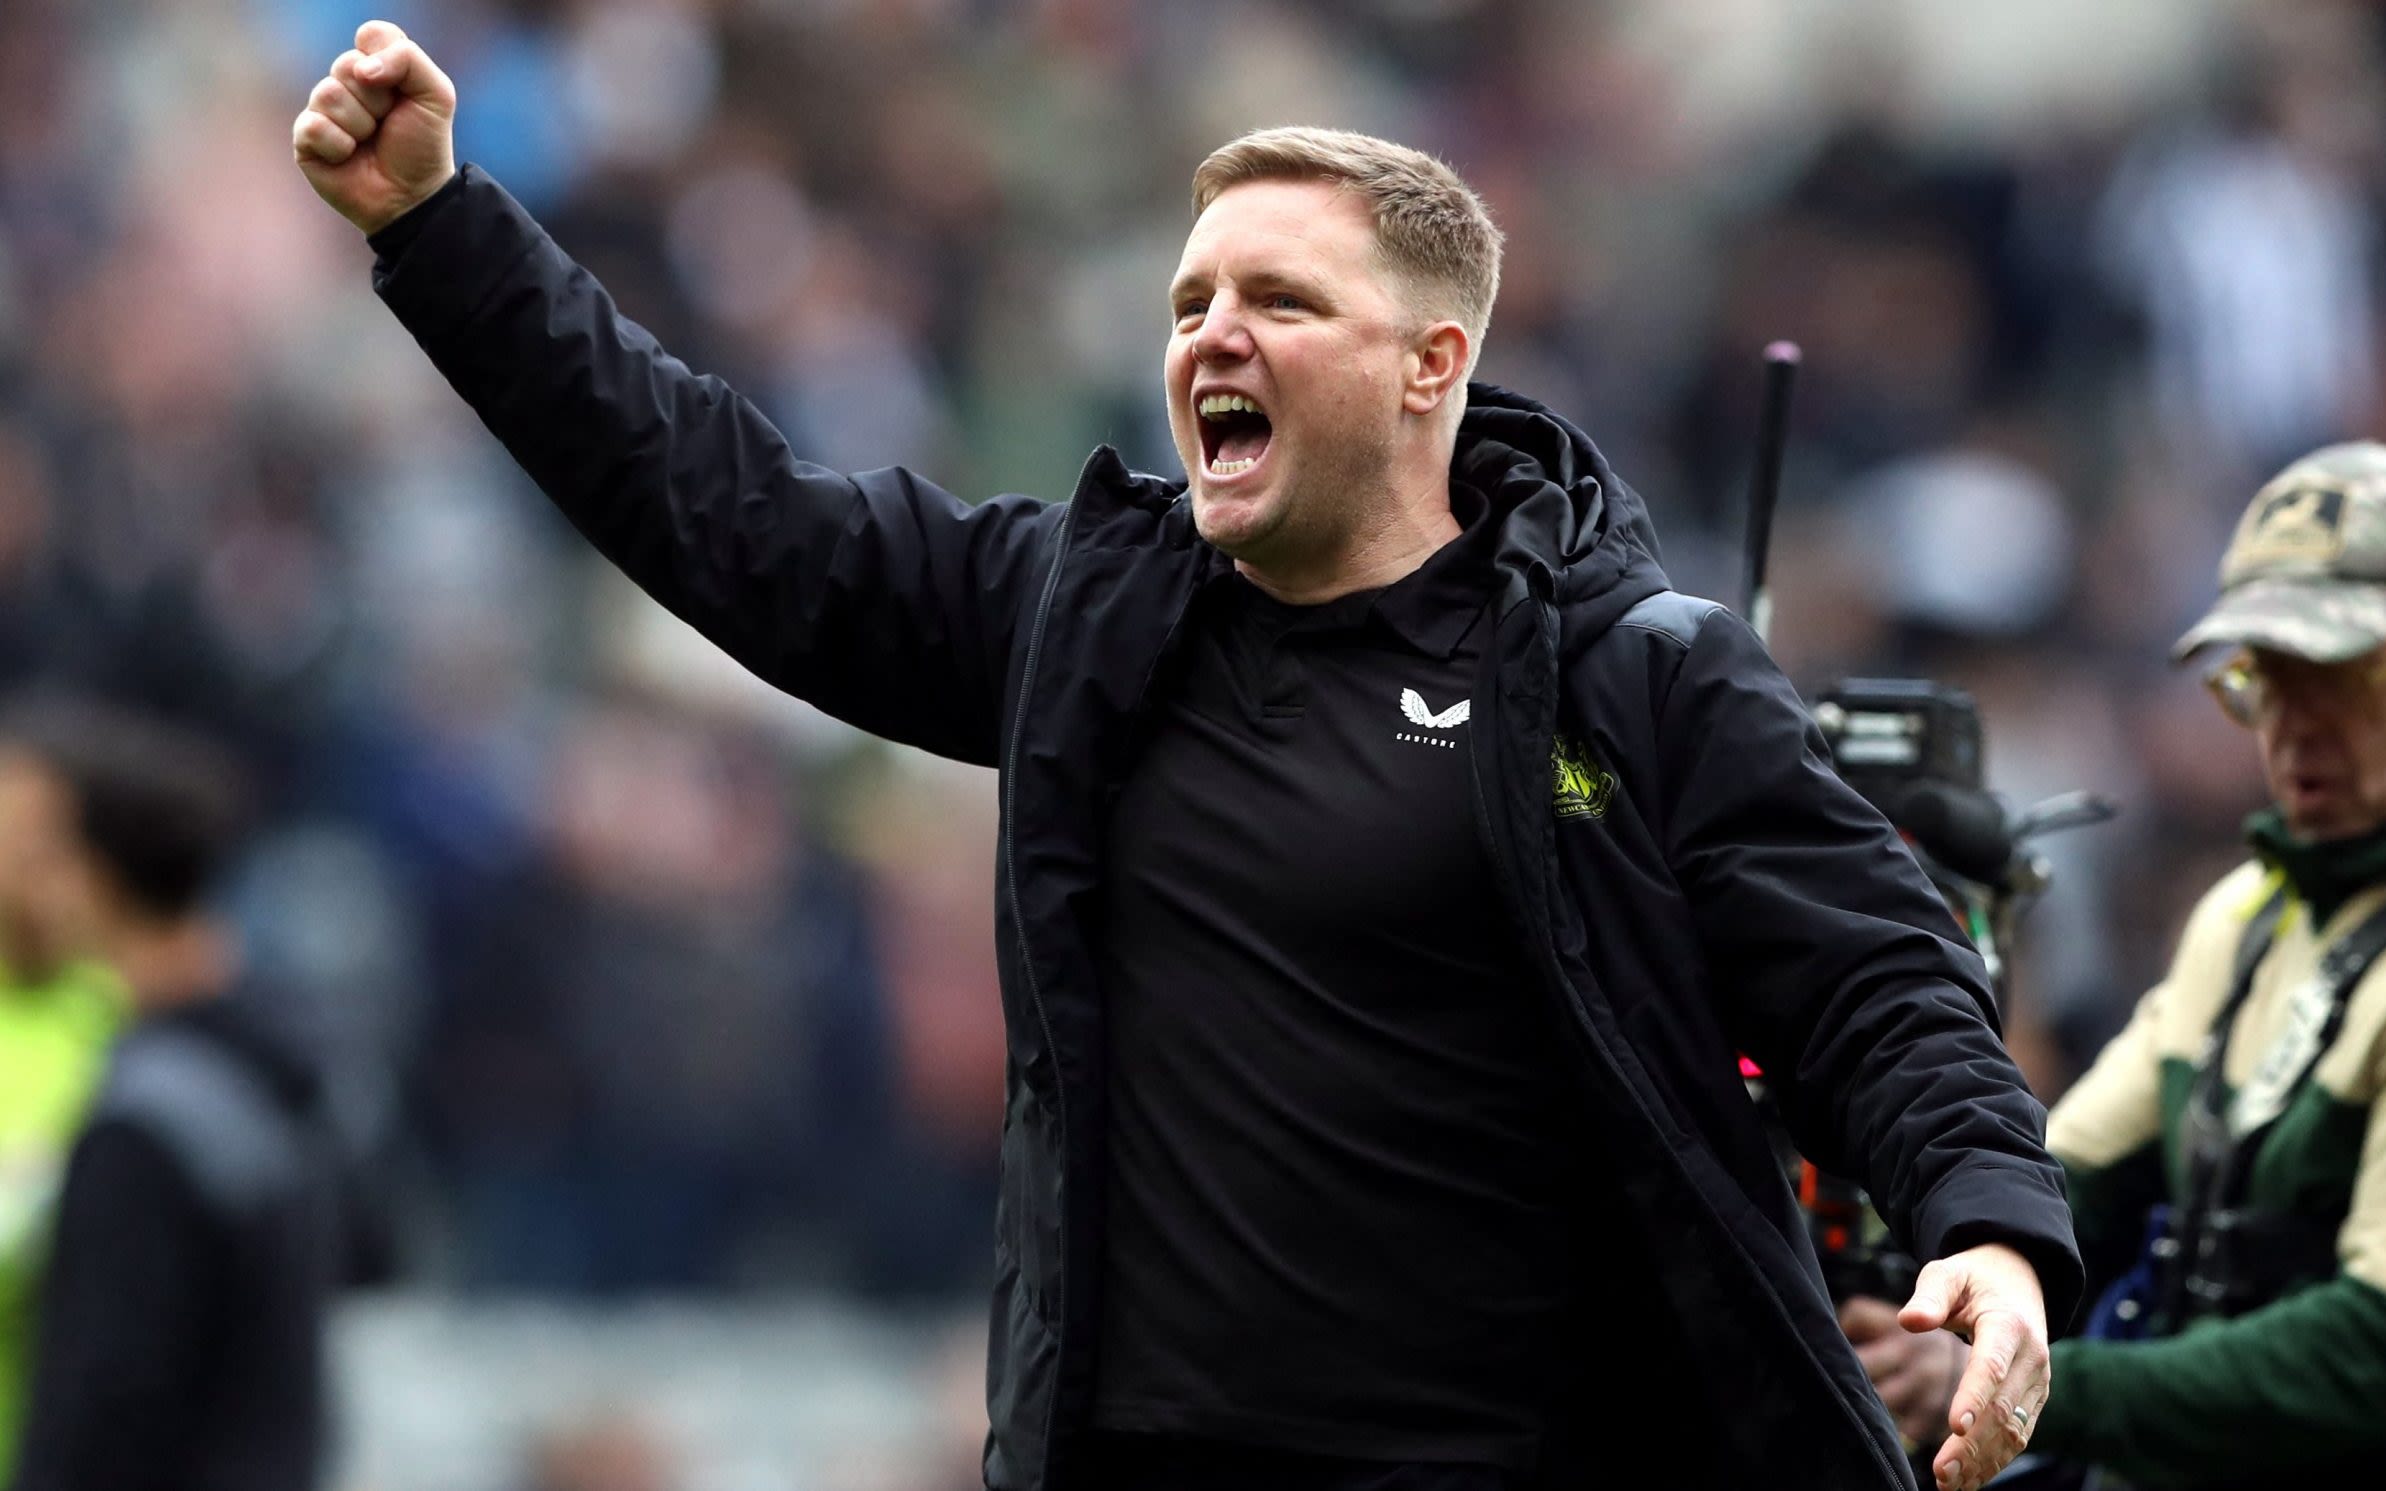 England have to go for Eddie Howe – he is the front-runner by a distance